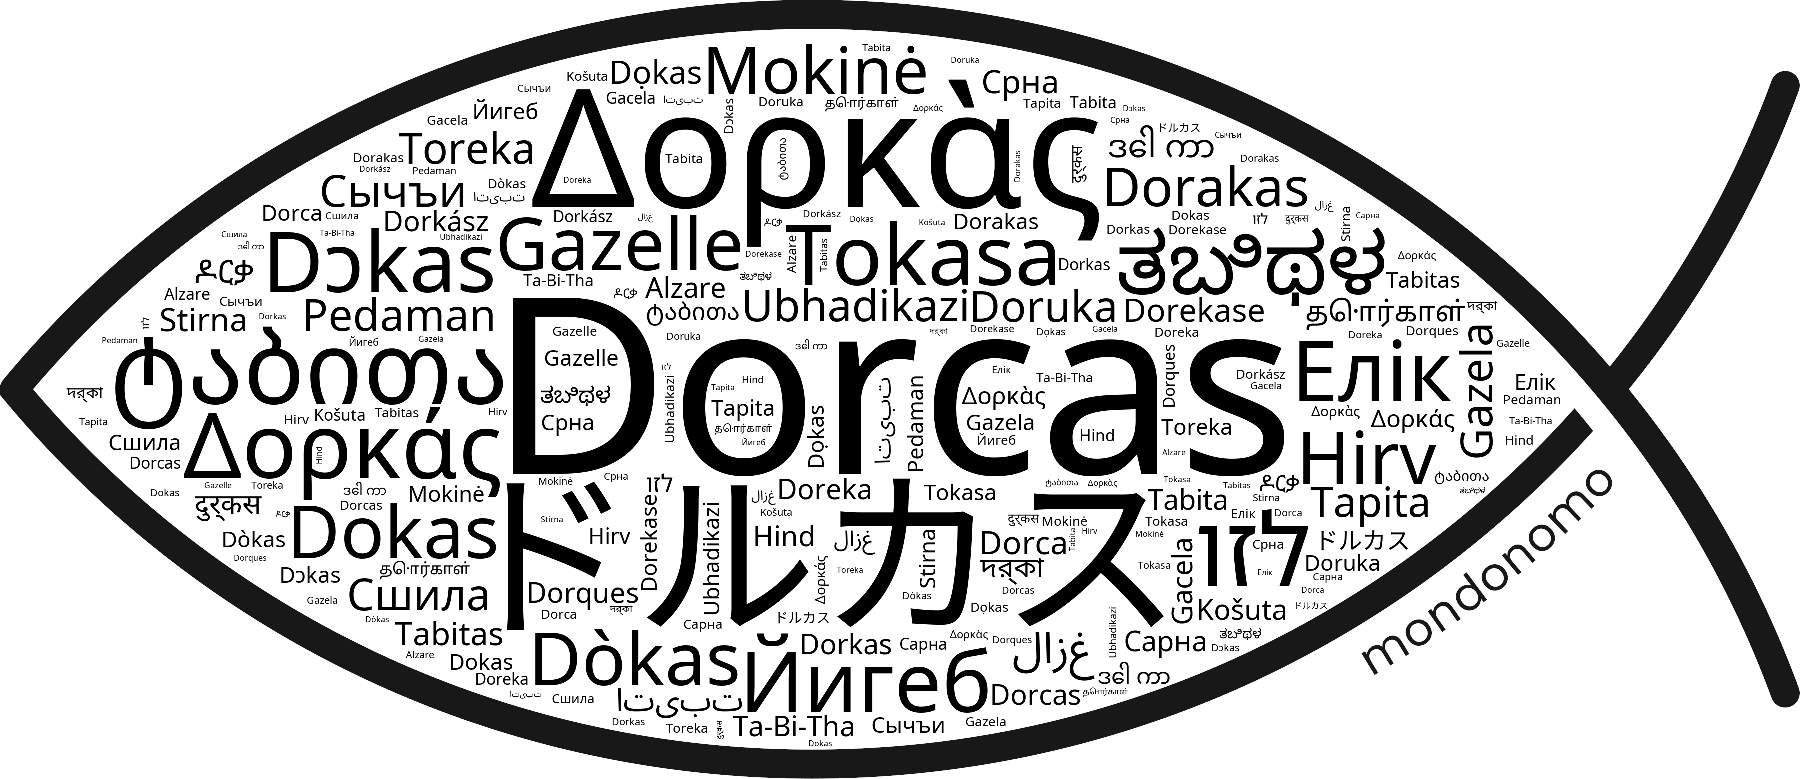 Name Dorcas in the world's Bibles